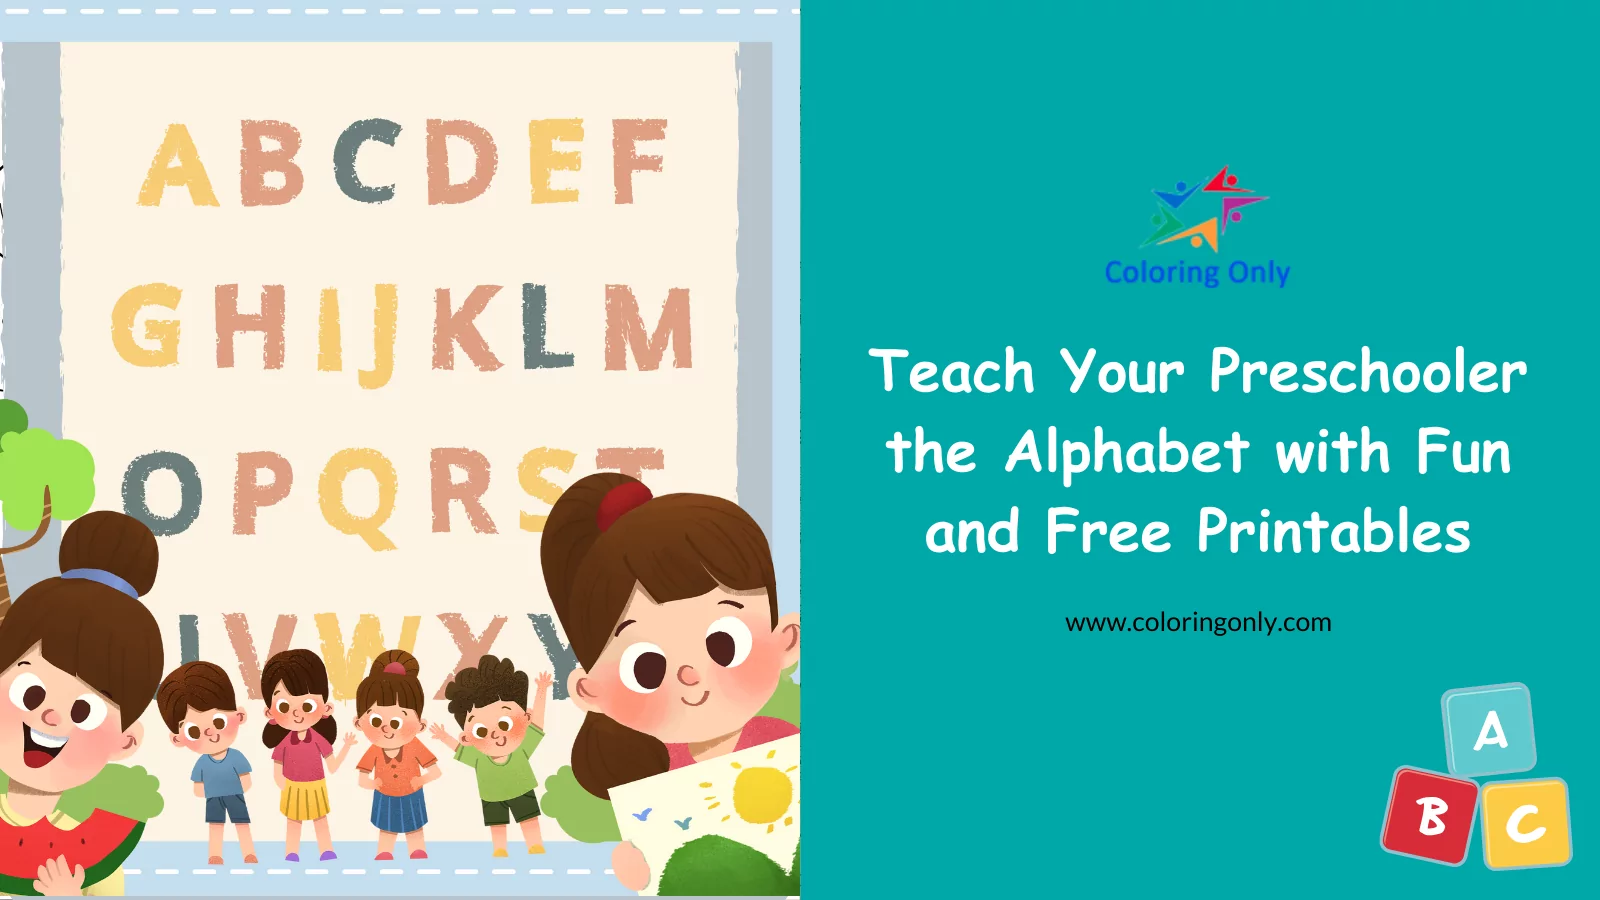 Teach Your Preschooler the Alphabet with Fun and Free Printables